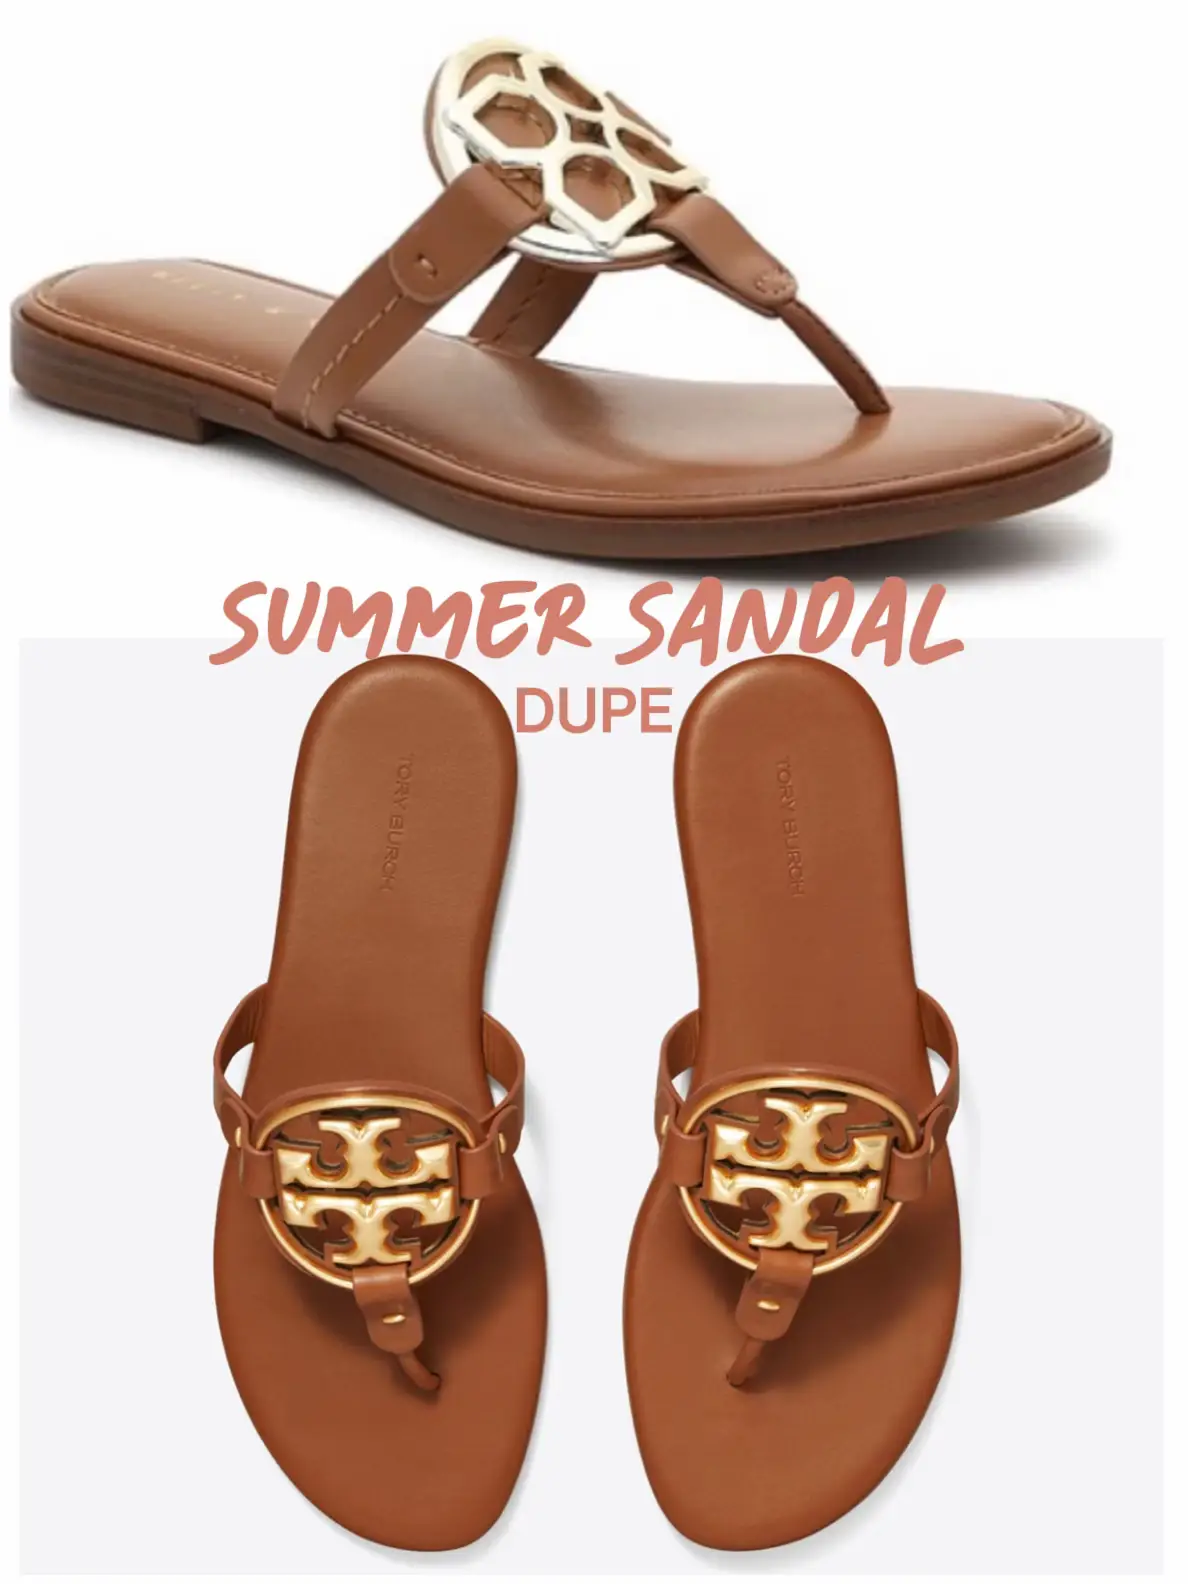 Tory Burch Miller sandals from DH Gate vs Authentic 